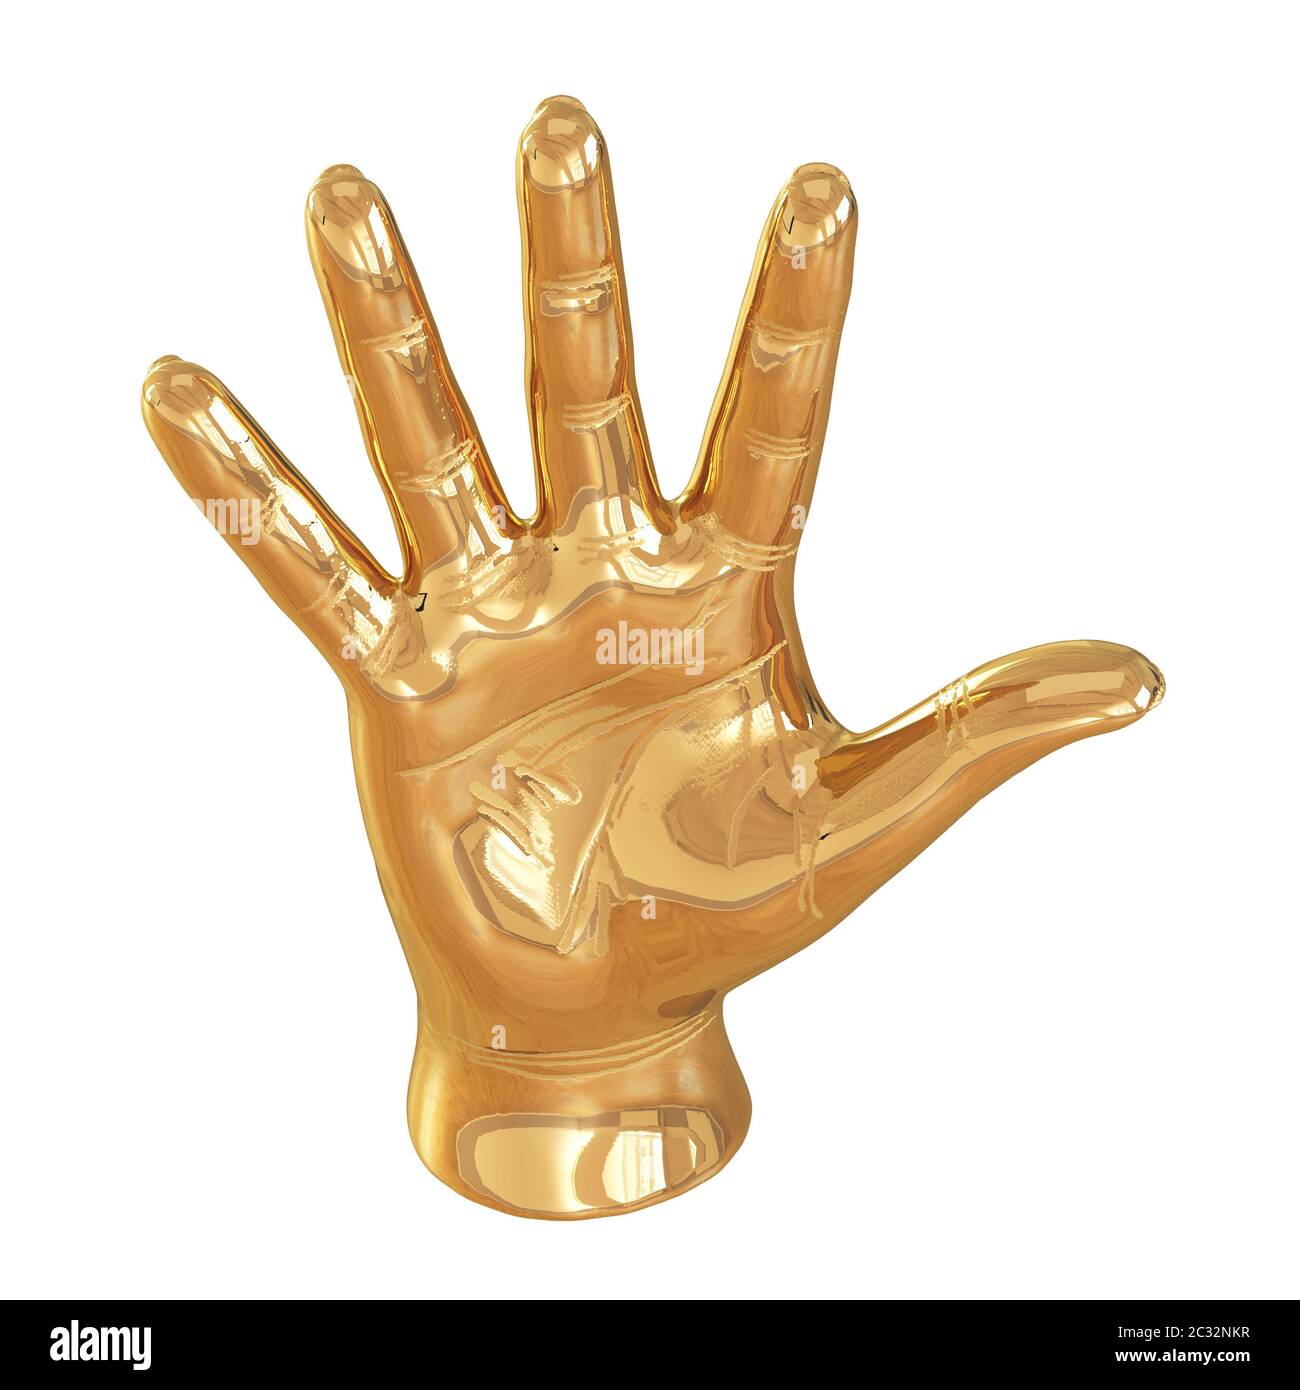 Golden statuette of a hand with an open palm on a white background. 3d rendering Stock Photo